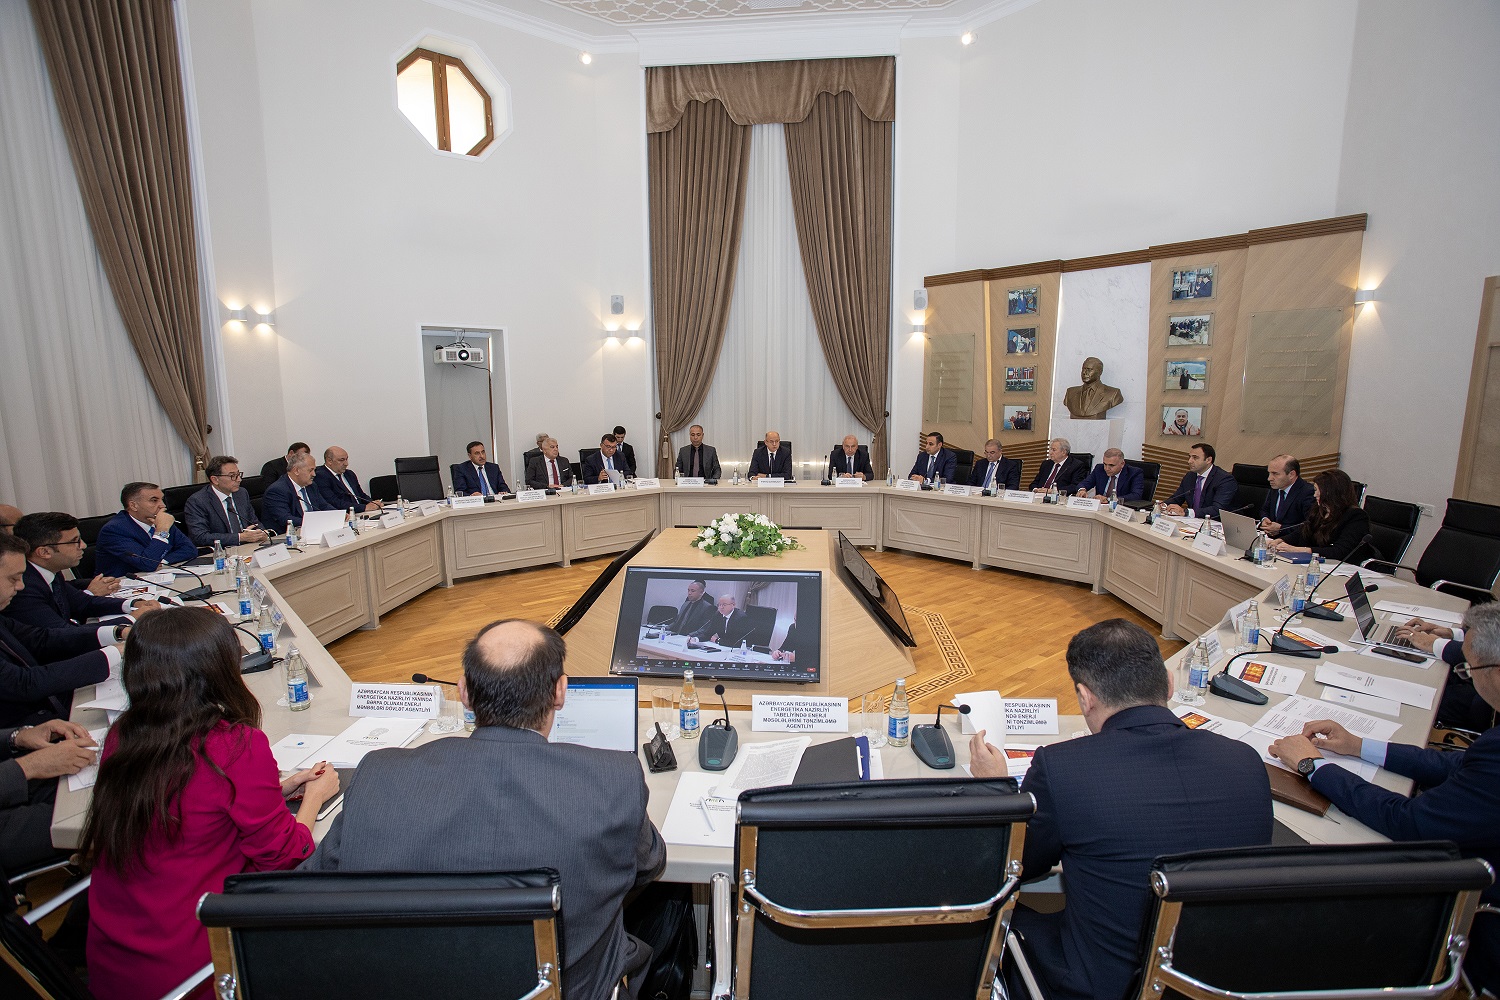 Next meeting of the Working Group on Coordination and Monitoring was held